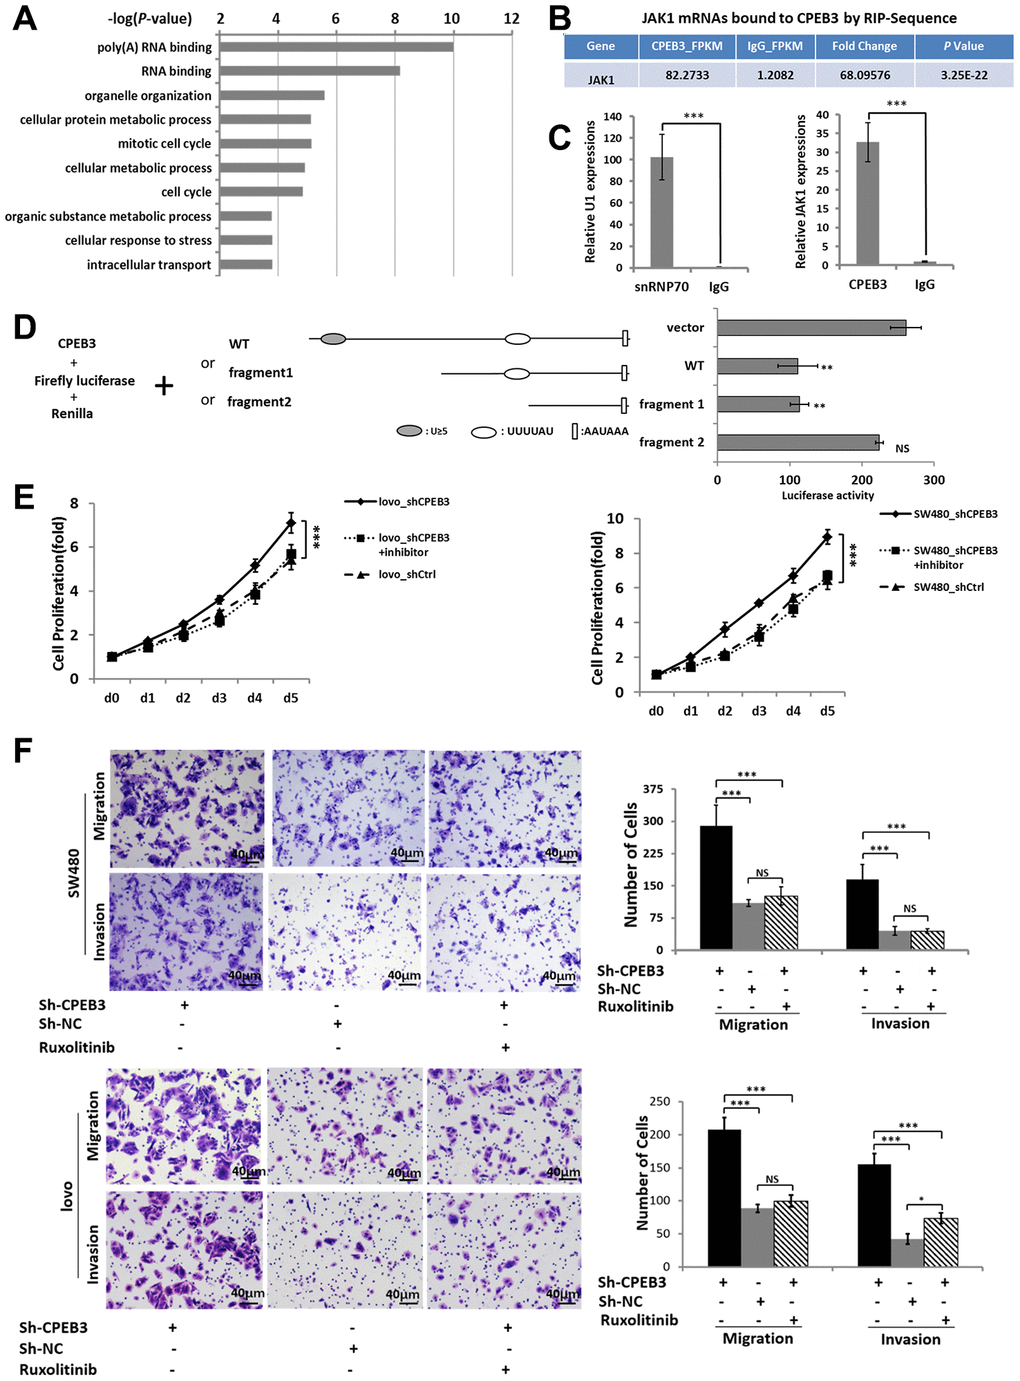 CPEB3 directly targets the 3’UTR of JAK1 and regulates colorectal cancer proliferation and metastasis via CPEB3/JAK/STAT axis. (A) High-throughput sequencing analysis of mRNAs bound to CPEB3 in SW480 cells showed the top 10 significantly enriched terms using Gene ontology analysis. (B) RNA immunoprecipitation and high-throughput sequencing analysis showed that JAK1 mRNA was significantly enriched in CPEB3 immunoprecipitates. (C) The combination of JAK1 mRNA and CPEB3 was further validated by RIP-qPCR. IgG and SnRNP70 are used as the negative and positive control respectively. Data are shown as mean ± SD (***PD) Luciferase reporter plasmid appended with different 3’UTR fragments of JAK1 mRNA were co-transfected with CPEB3 in the HEK-293T cell line, and luciferase activity was detected. Data are displayed as the means ± SD (**PE, F) Impairment of JAK/STAT pathway by Ruxolitinib could reverse the effect of CPEB3 down-regulation on proliferation ability by CCK-8 assay (E) as well as the migration and invasion ability by transwell assays (original magnification, ×400) of colorectal cancer cell lines. (F).